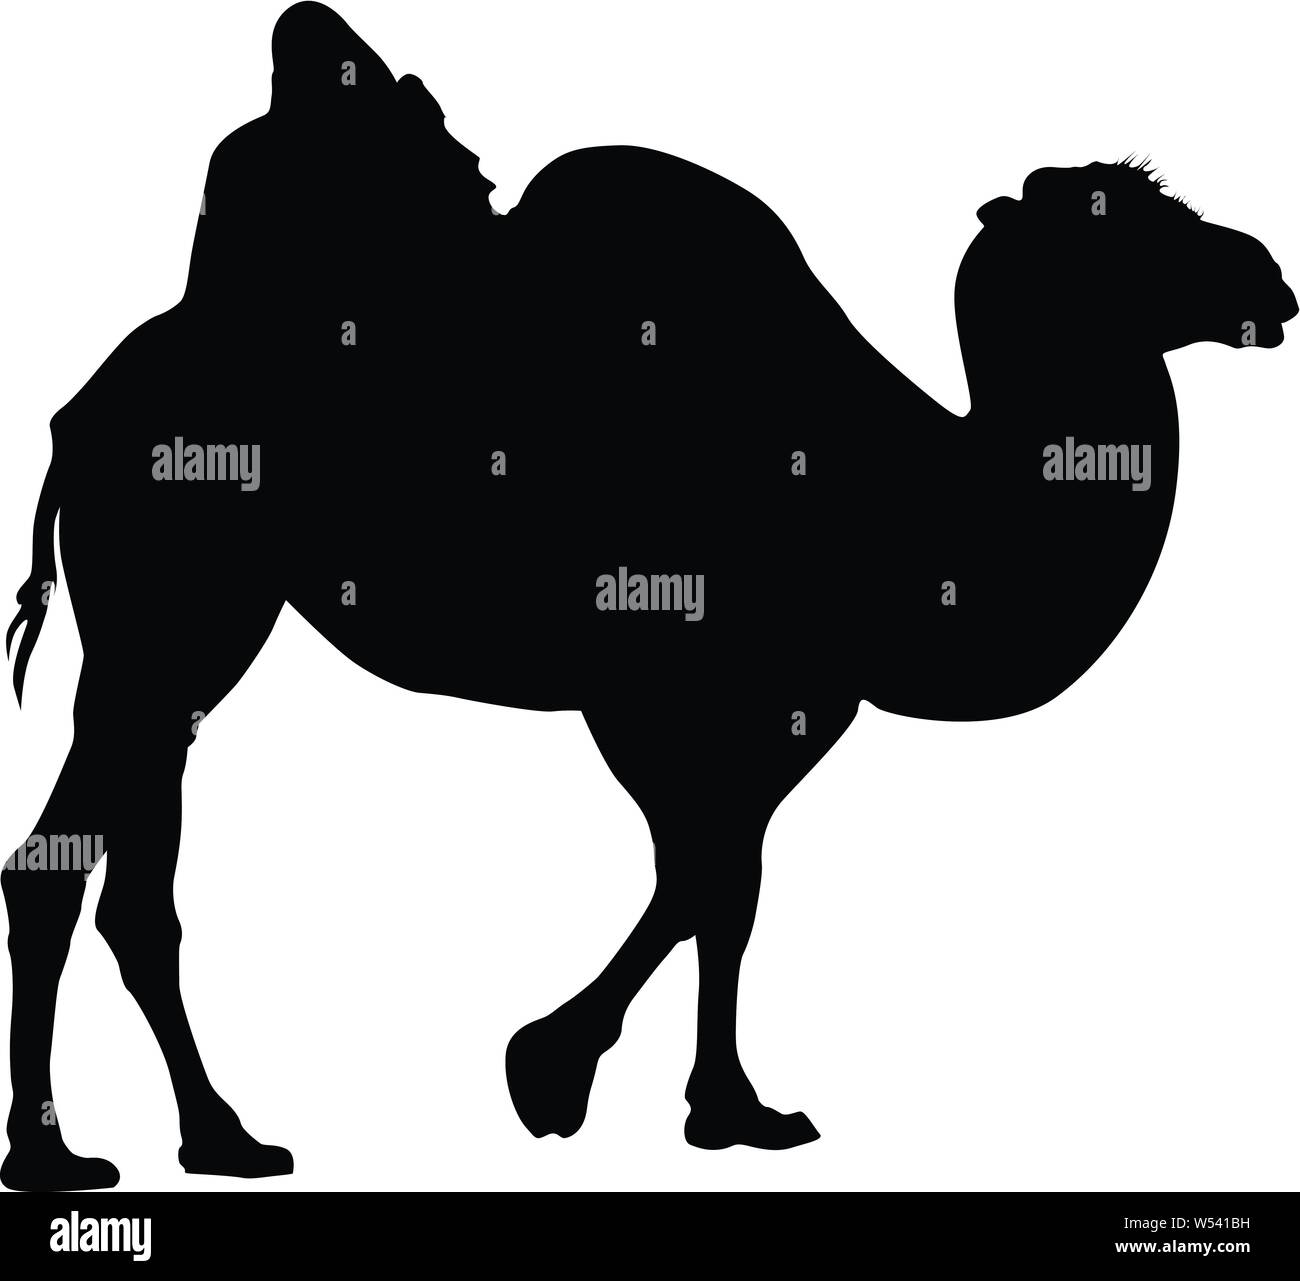 Camel Silhouette  Vector Image Illustration Isolated On White Stock Vector